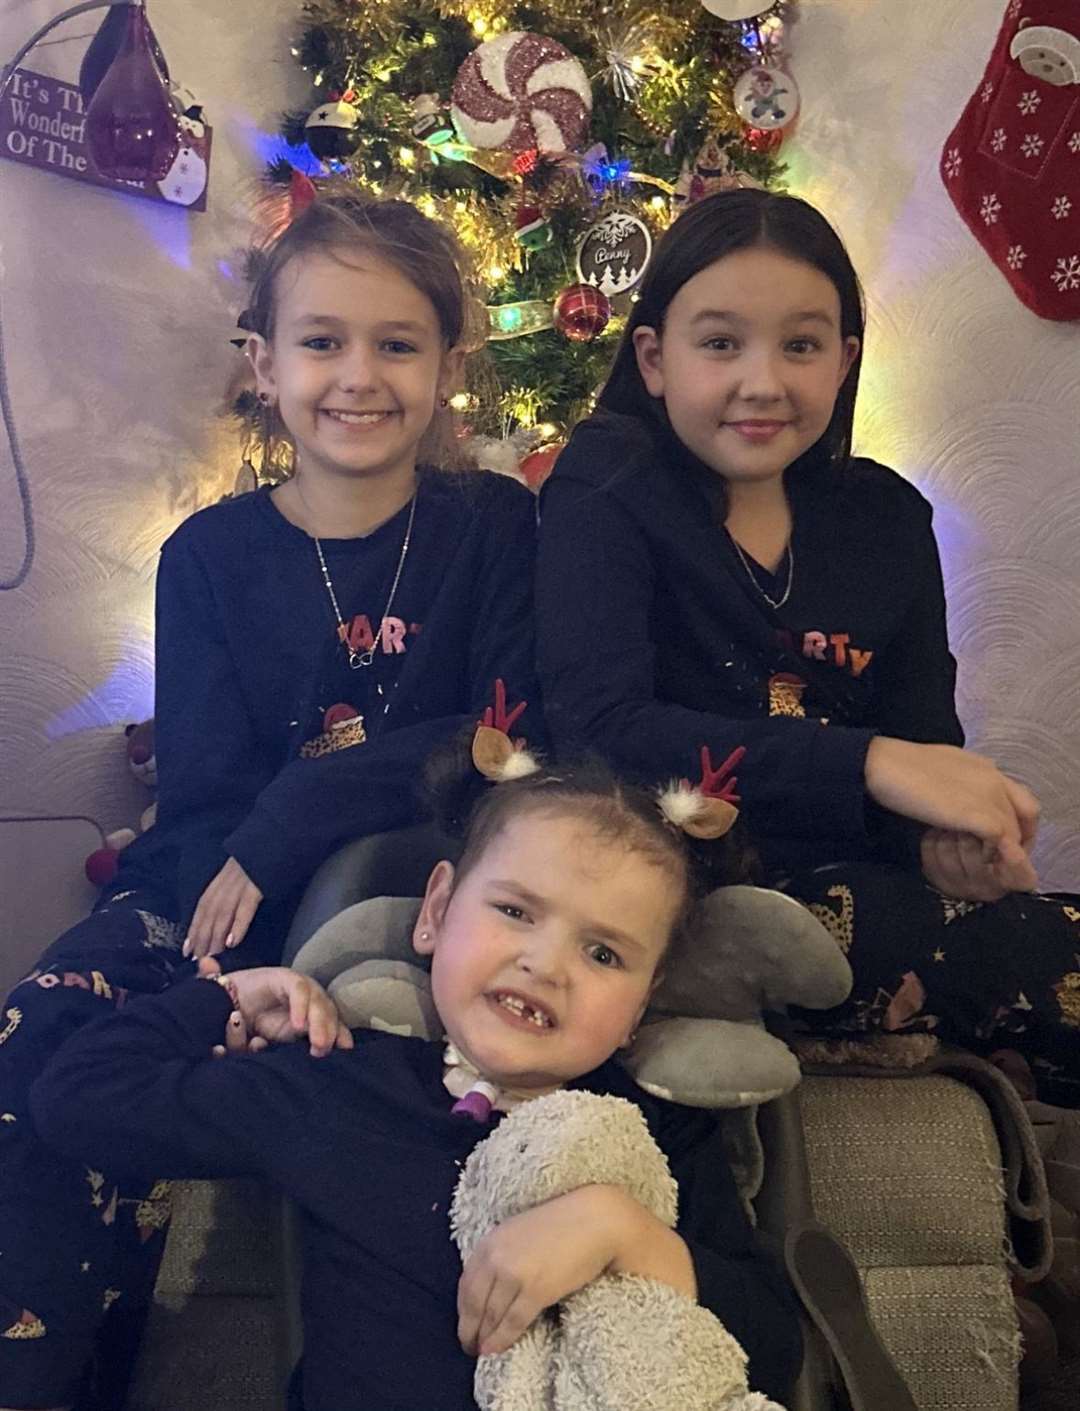 The three sisters together during Christmas. Photo: Lauren Windget